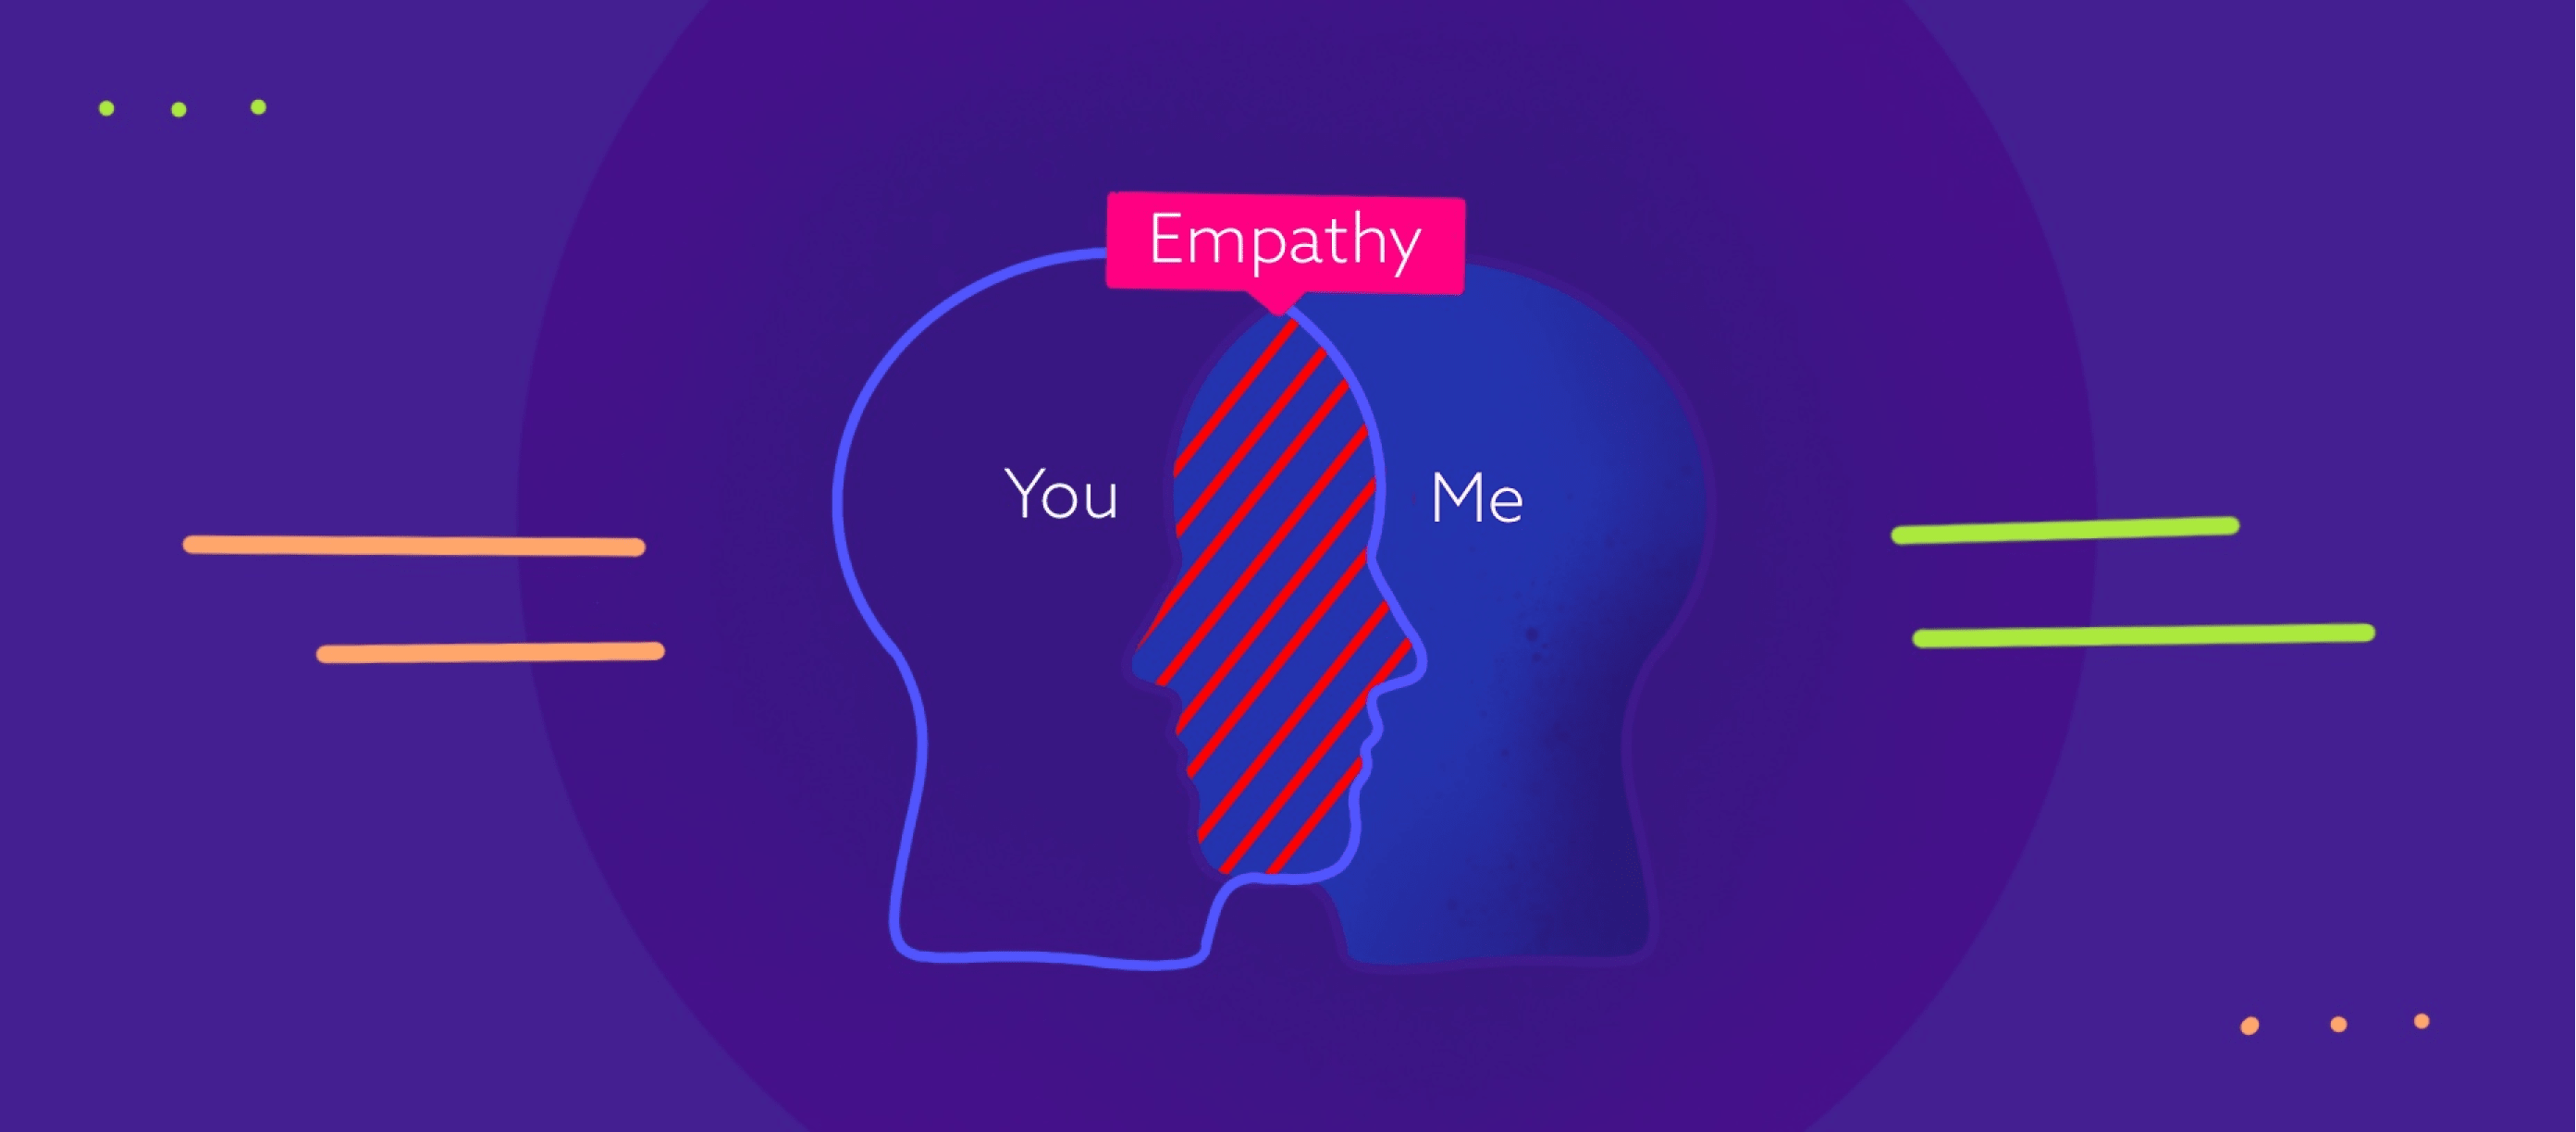 Empathy in Product Design